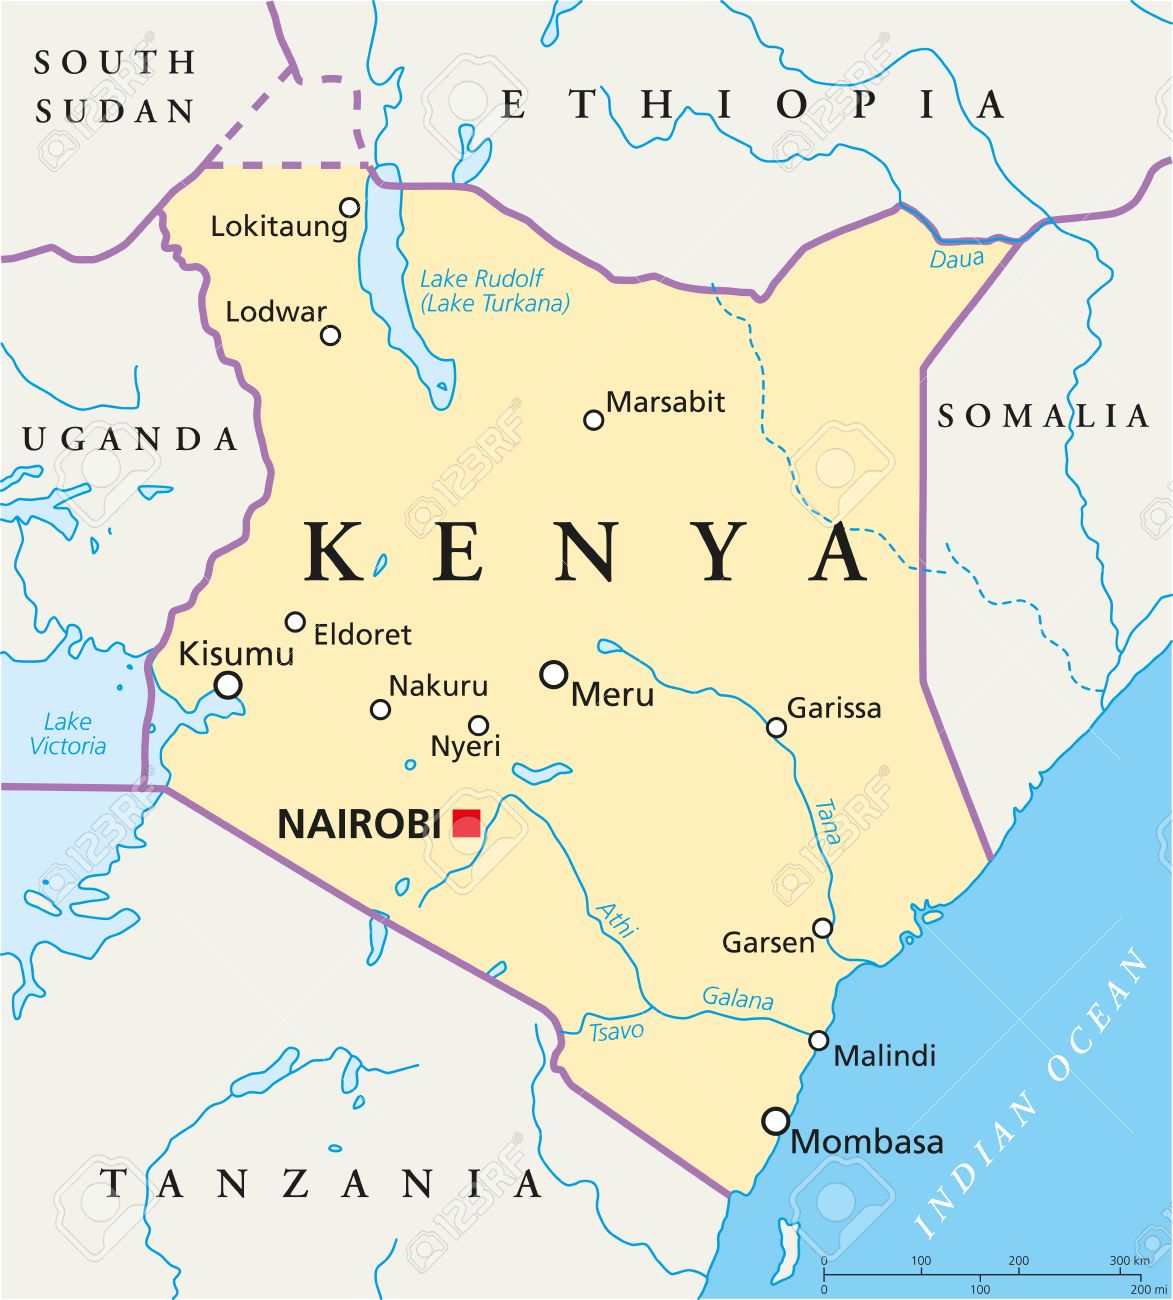 30395102-kenya-political-map-with-capital-nairobi-national-borders-most-important-cities-rivers-and-lakes.jpg